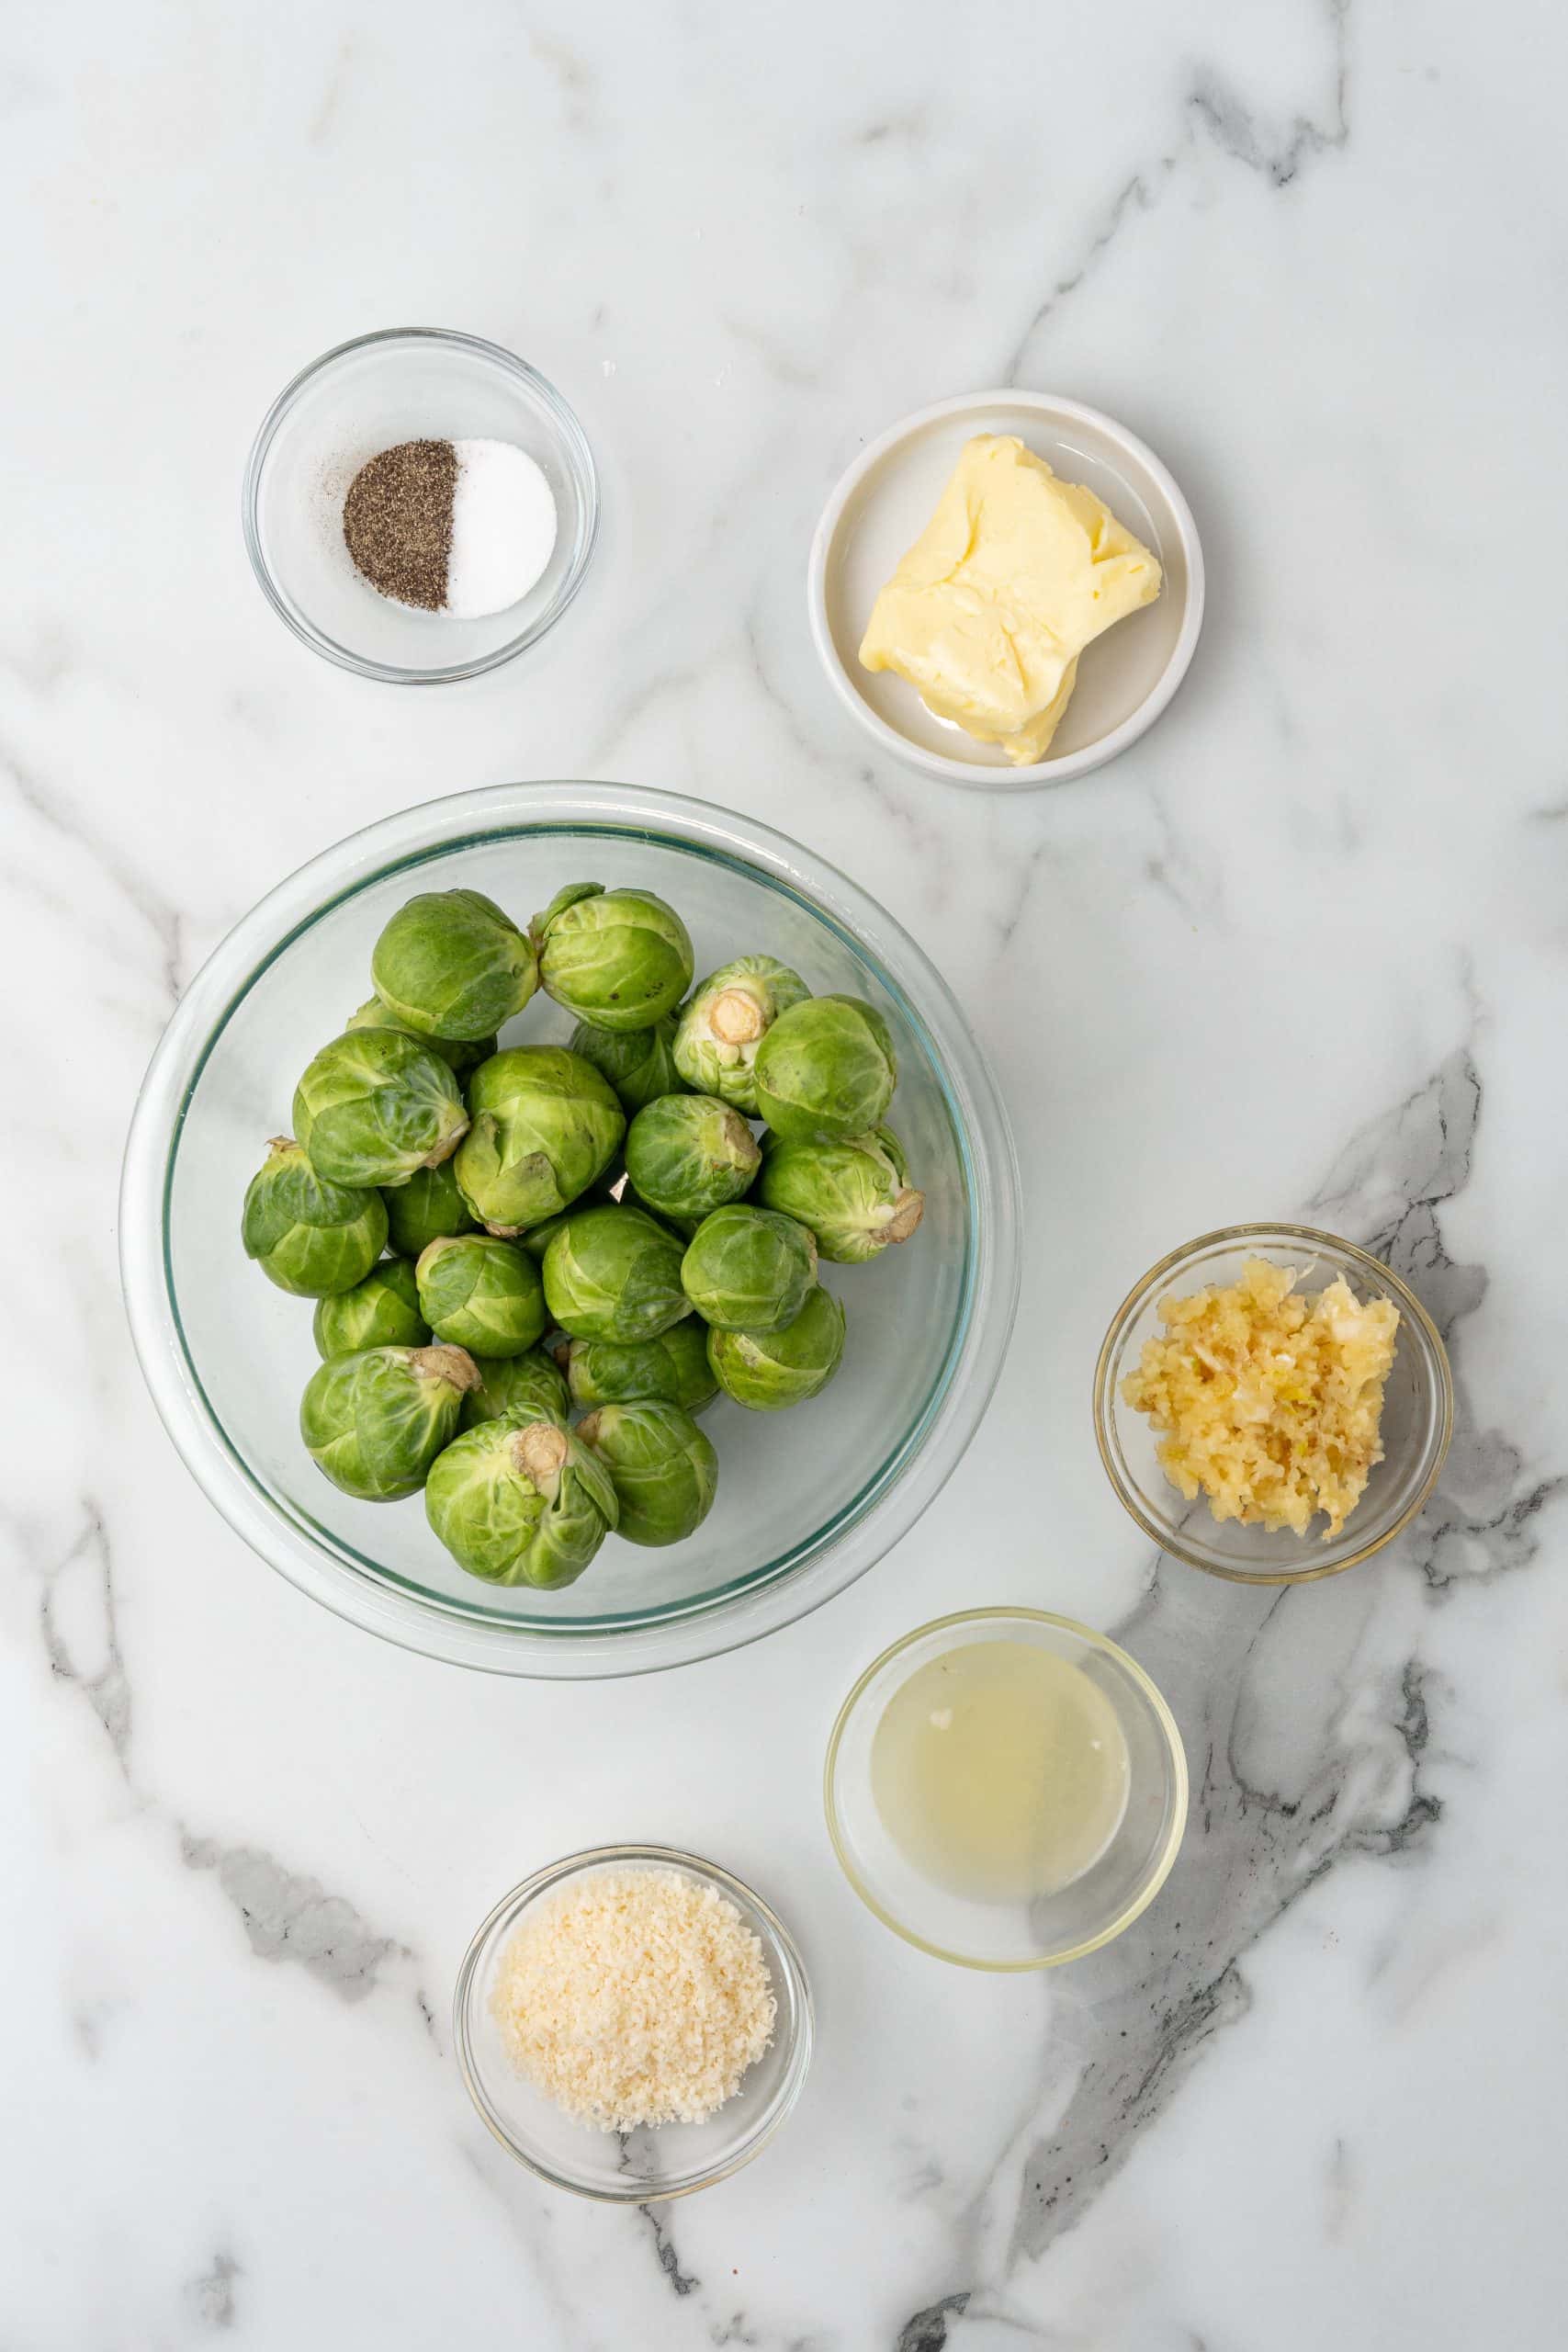 an overhead image showing the measured ingredients needed to make a batch of sauteed brussels sprouts with lemon and garlic